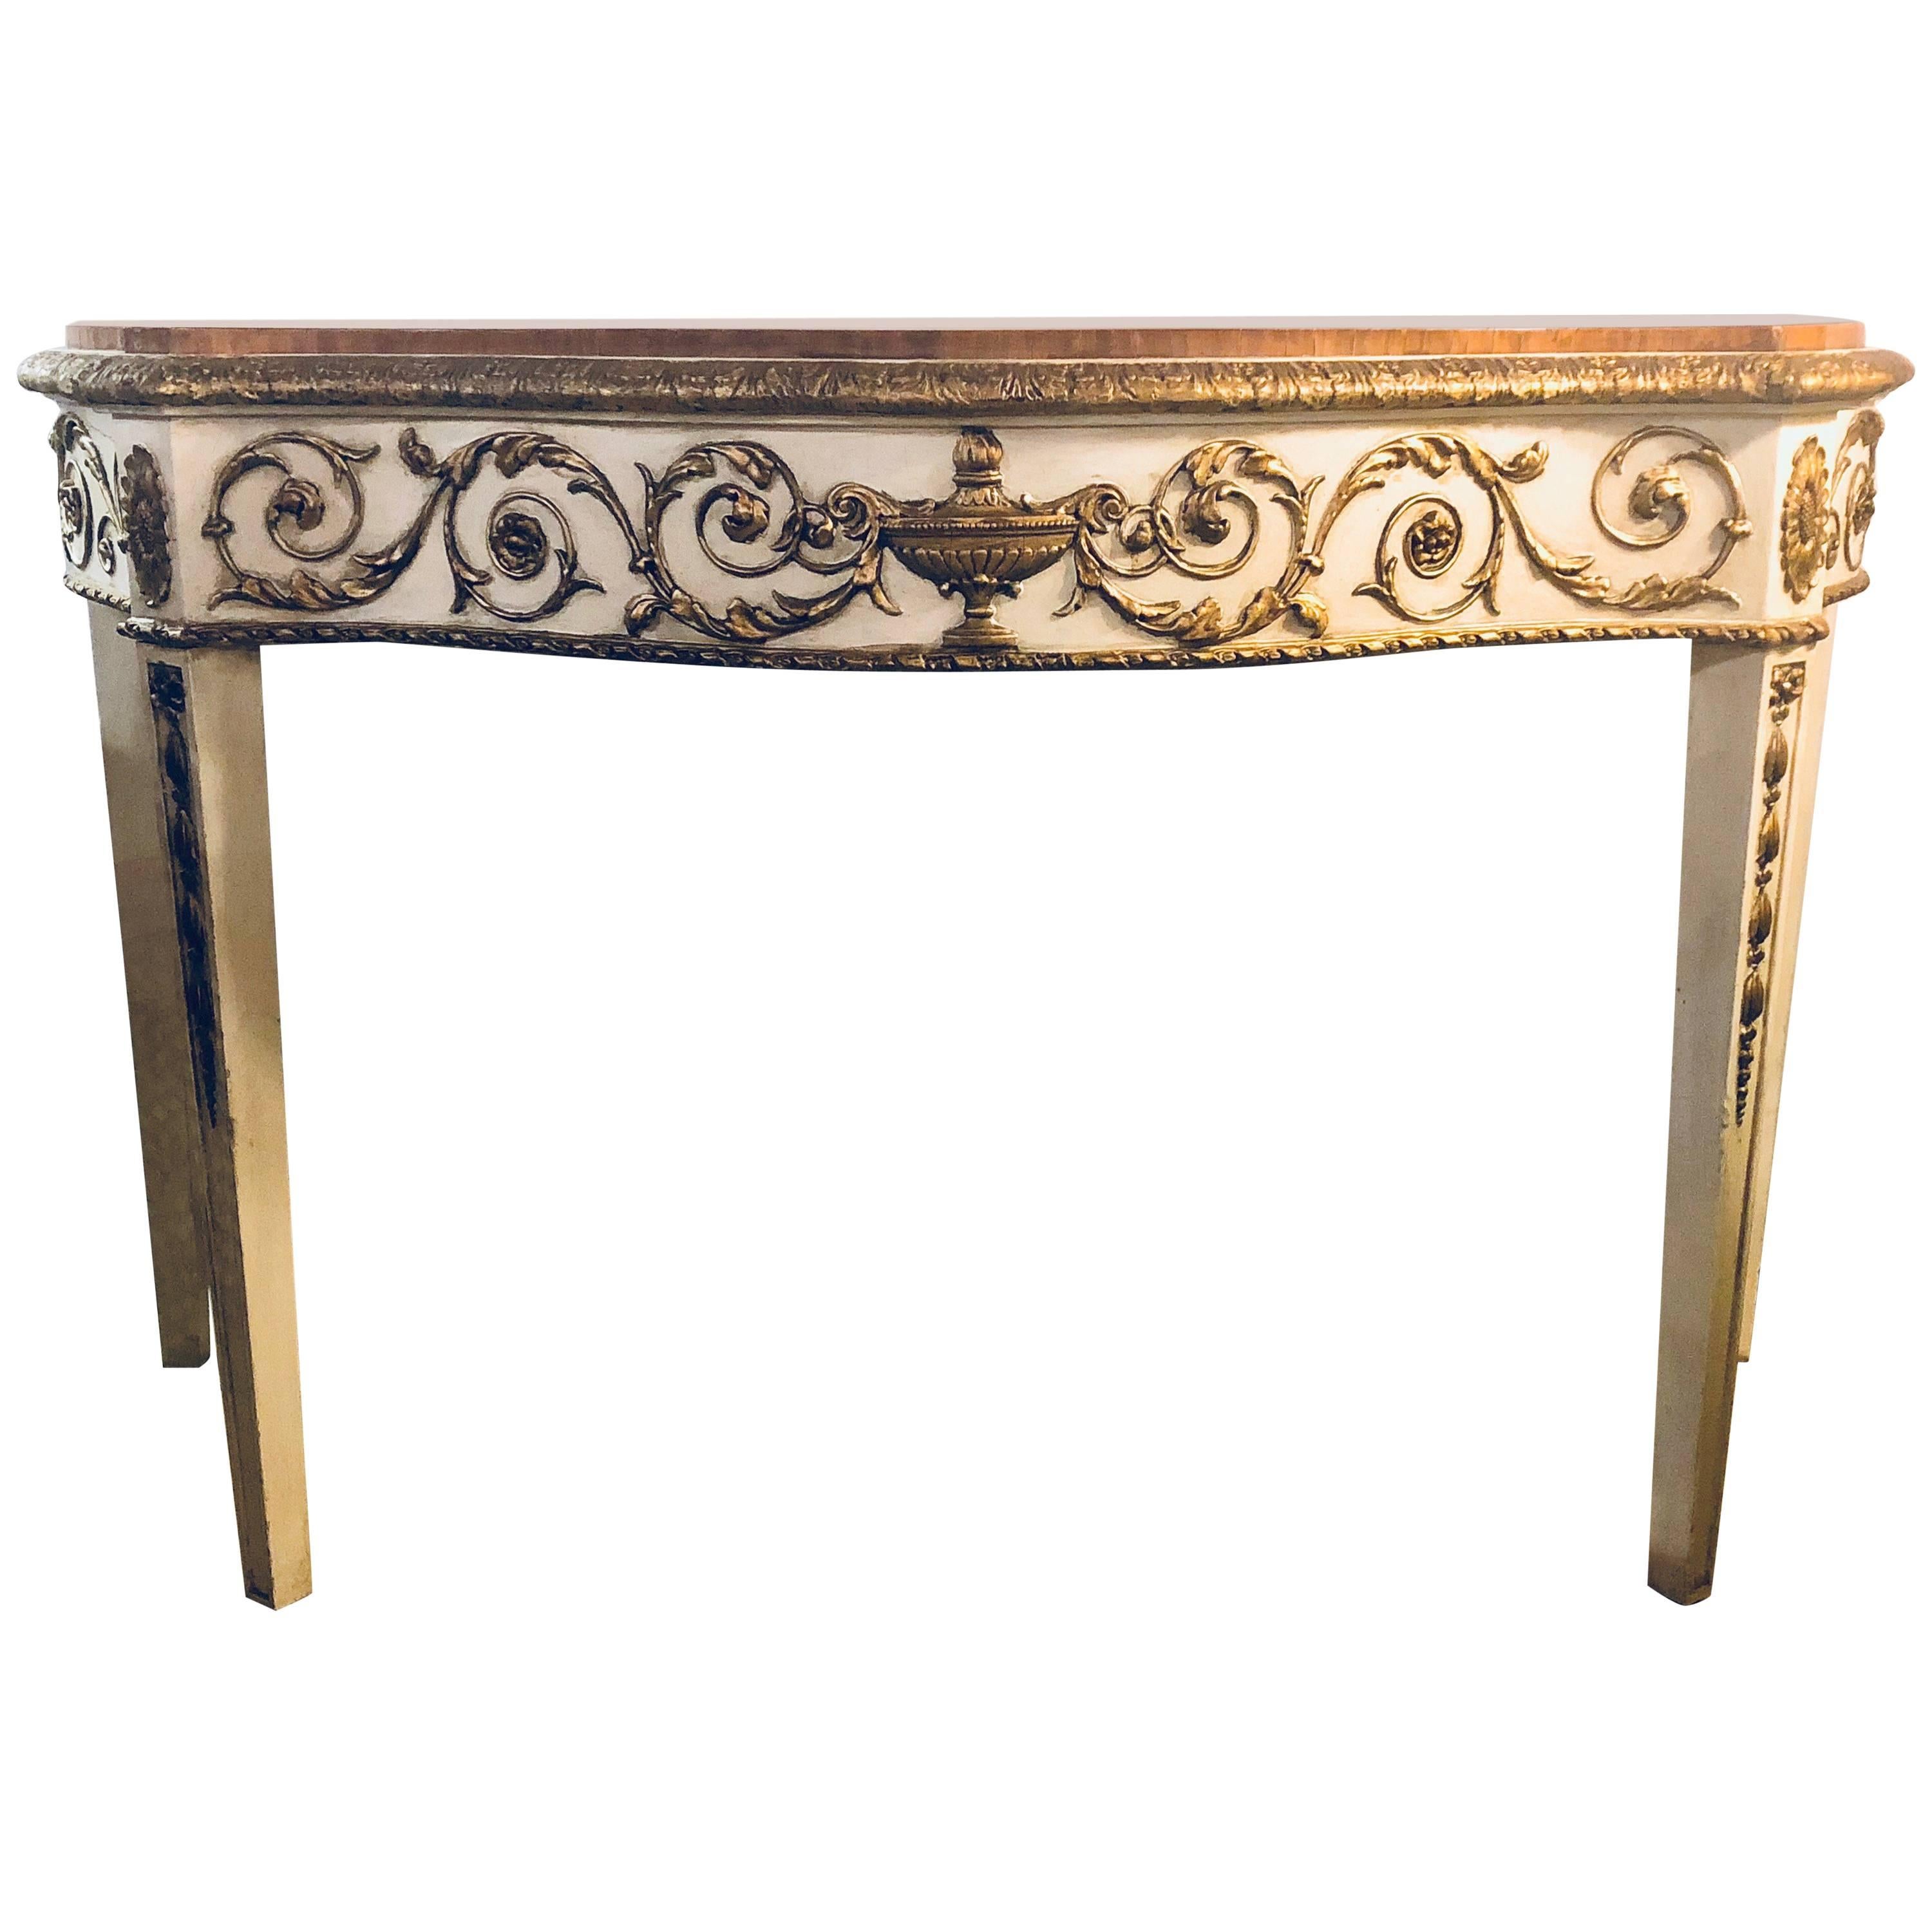 Painted Console or Demilune Table Fine Wood Top Louis XV Style by Maison Jansen